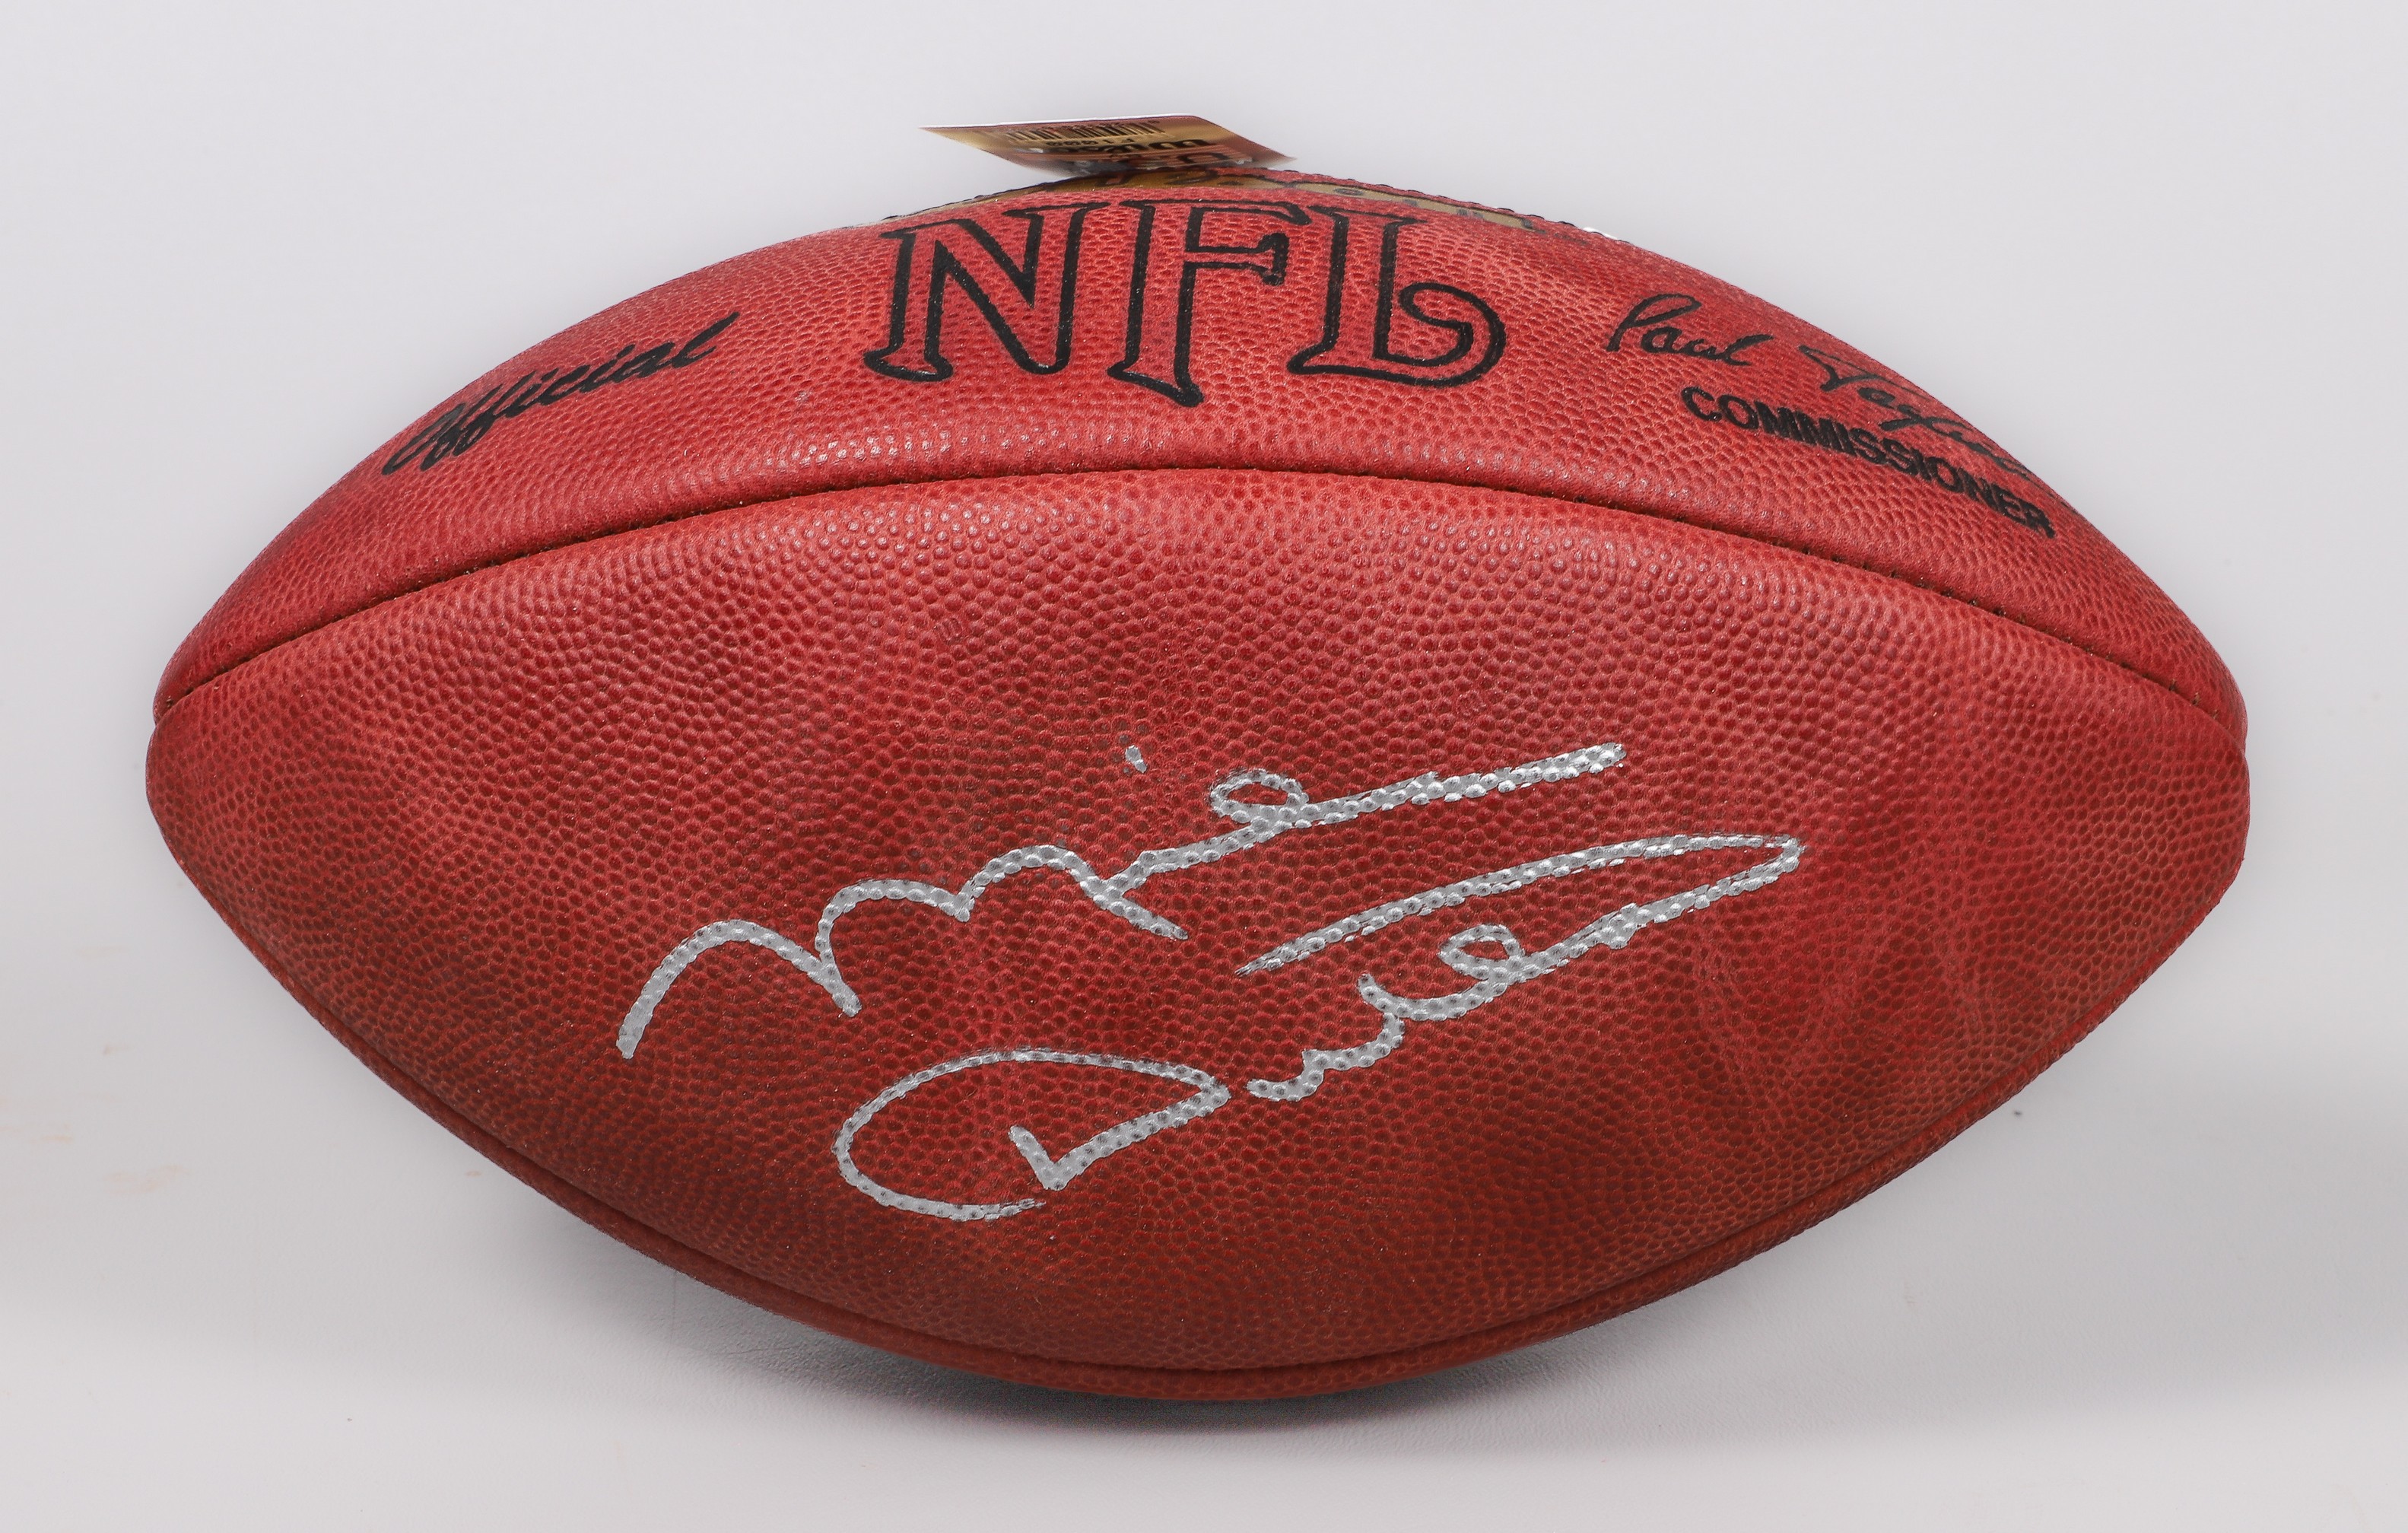 Wilson NFL football signed in 3b620a